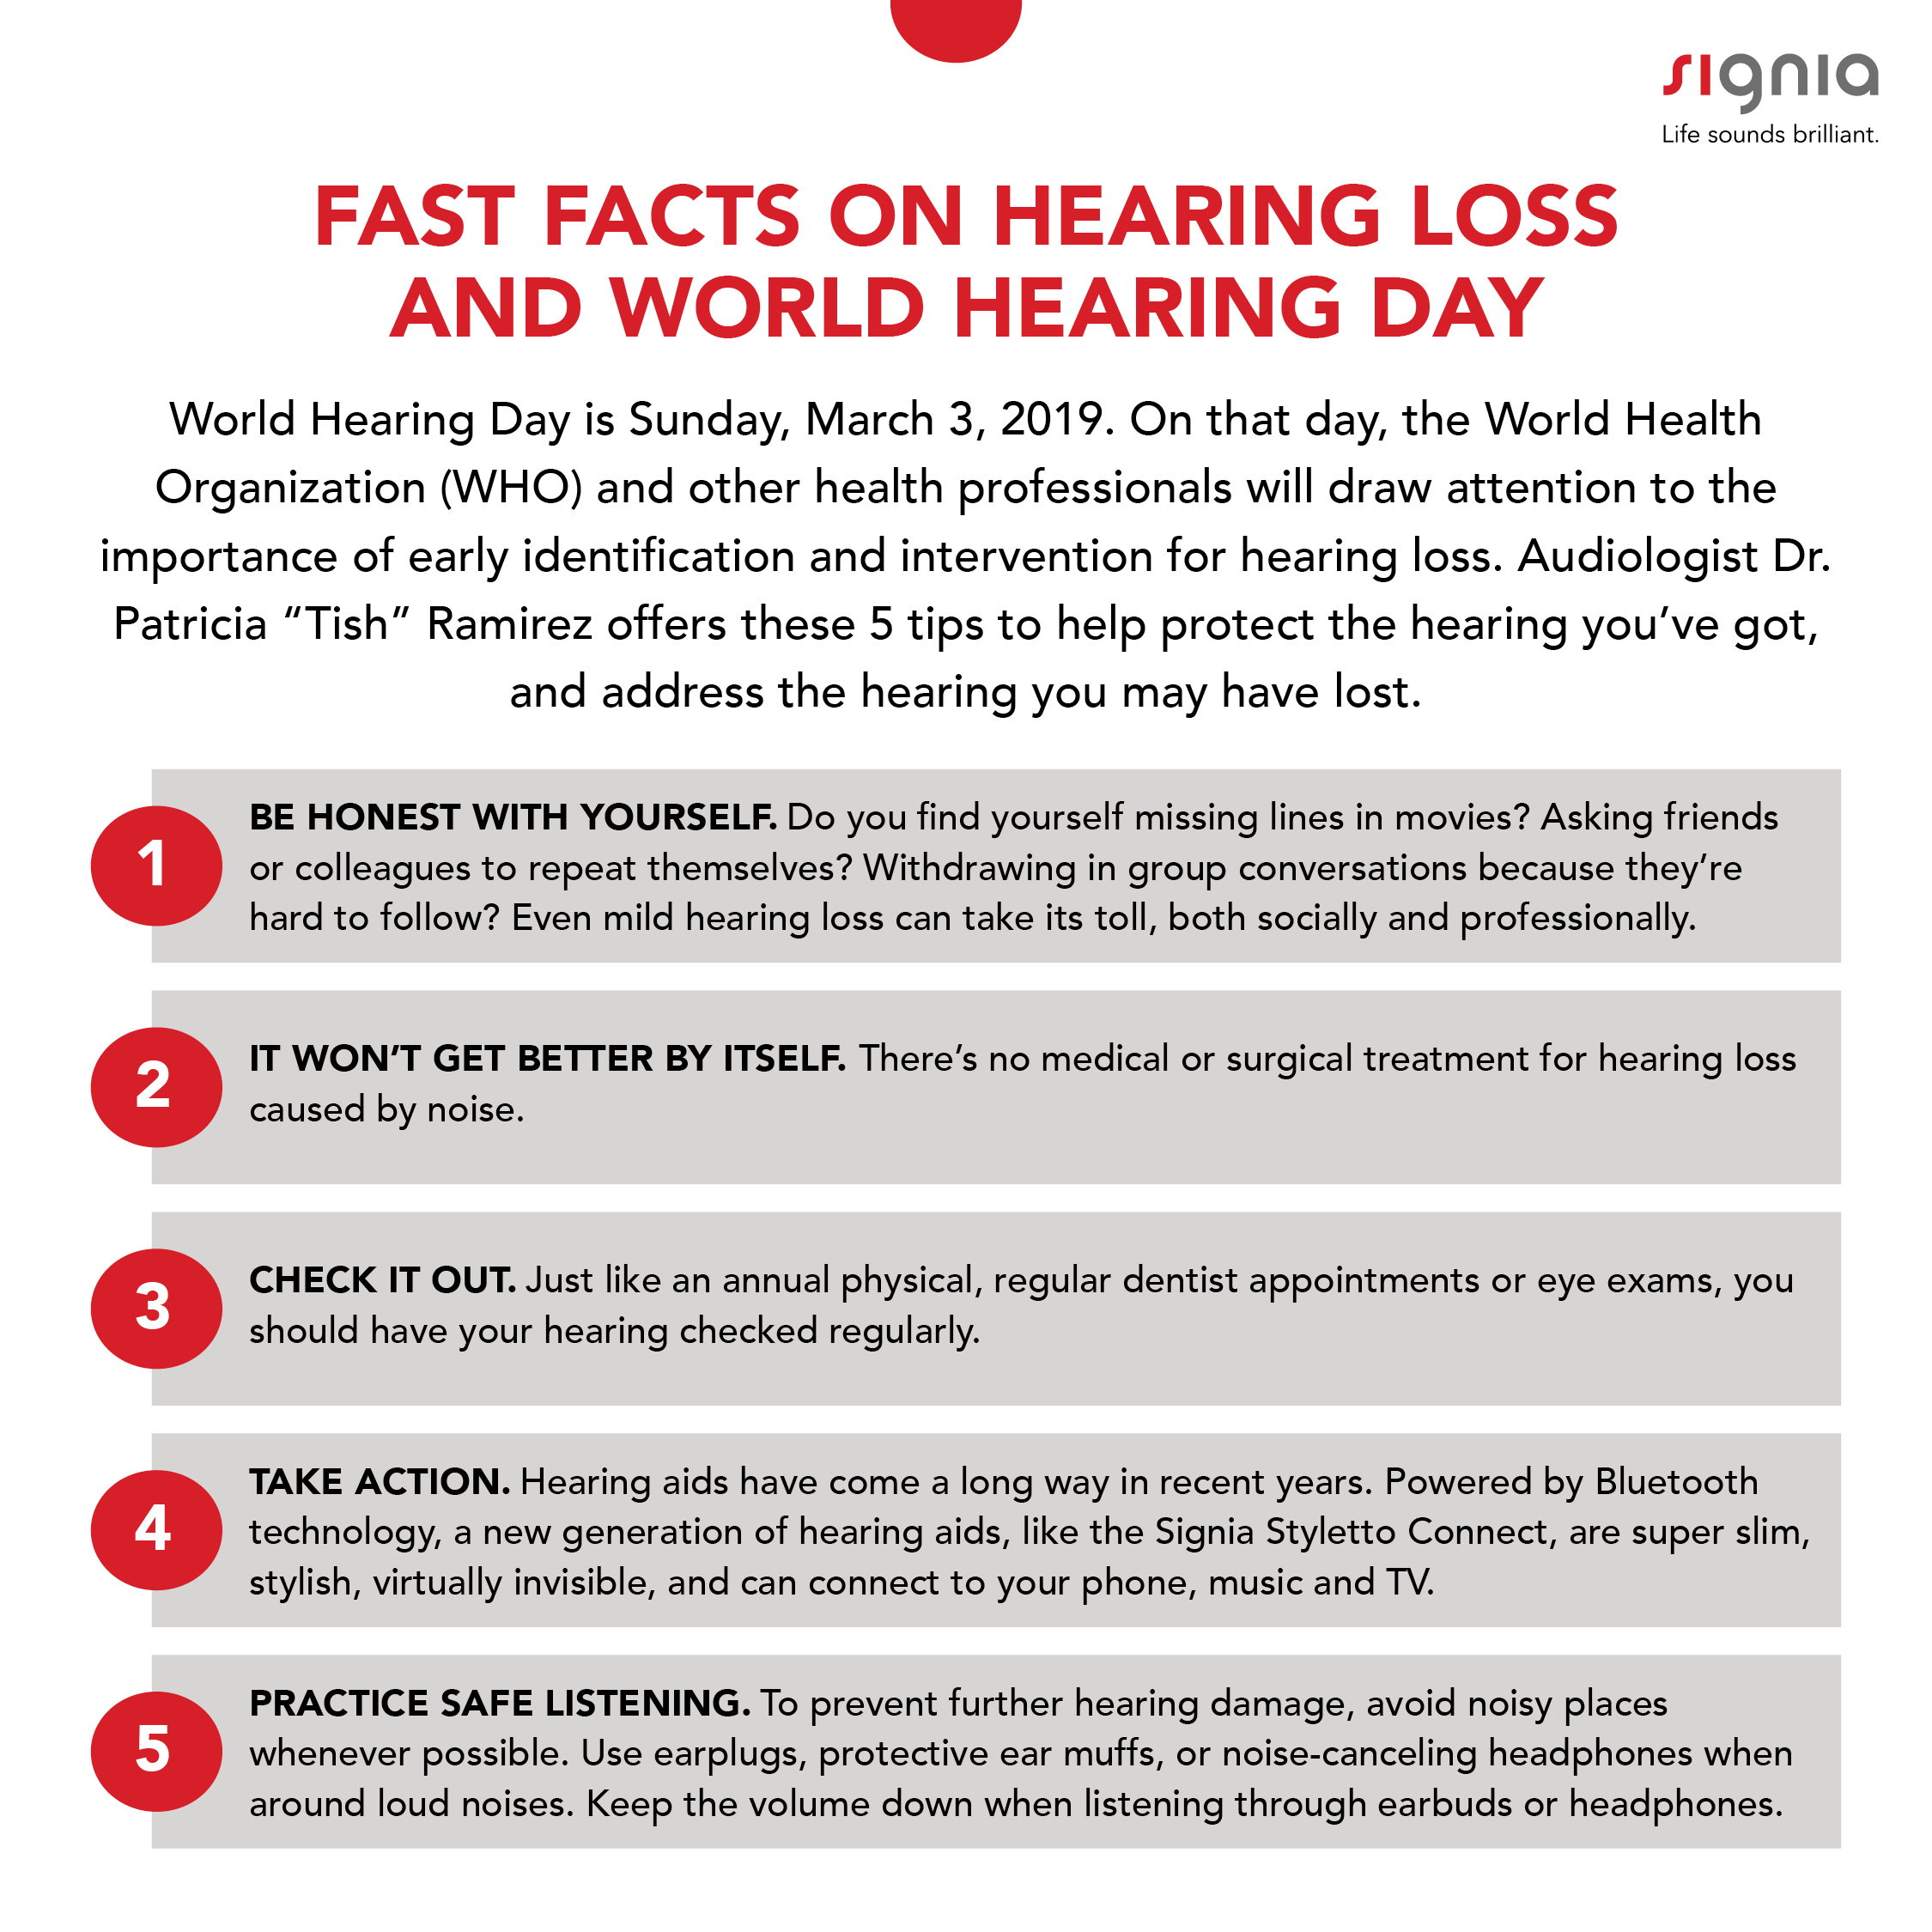 Five Tips to Take Care of Your Hearing from Signia